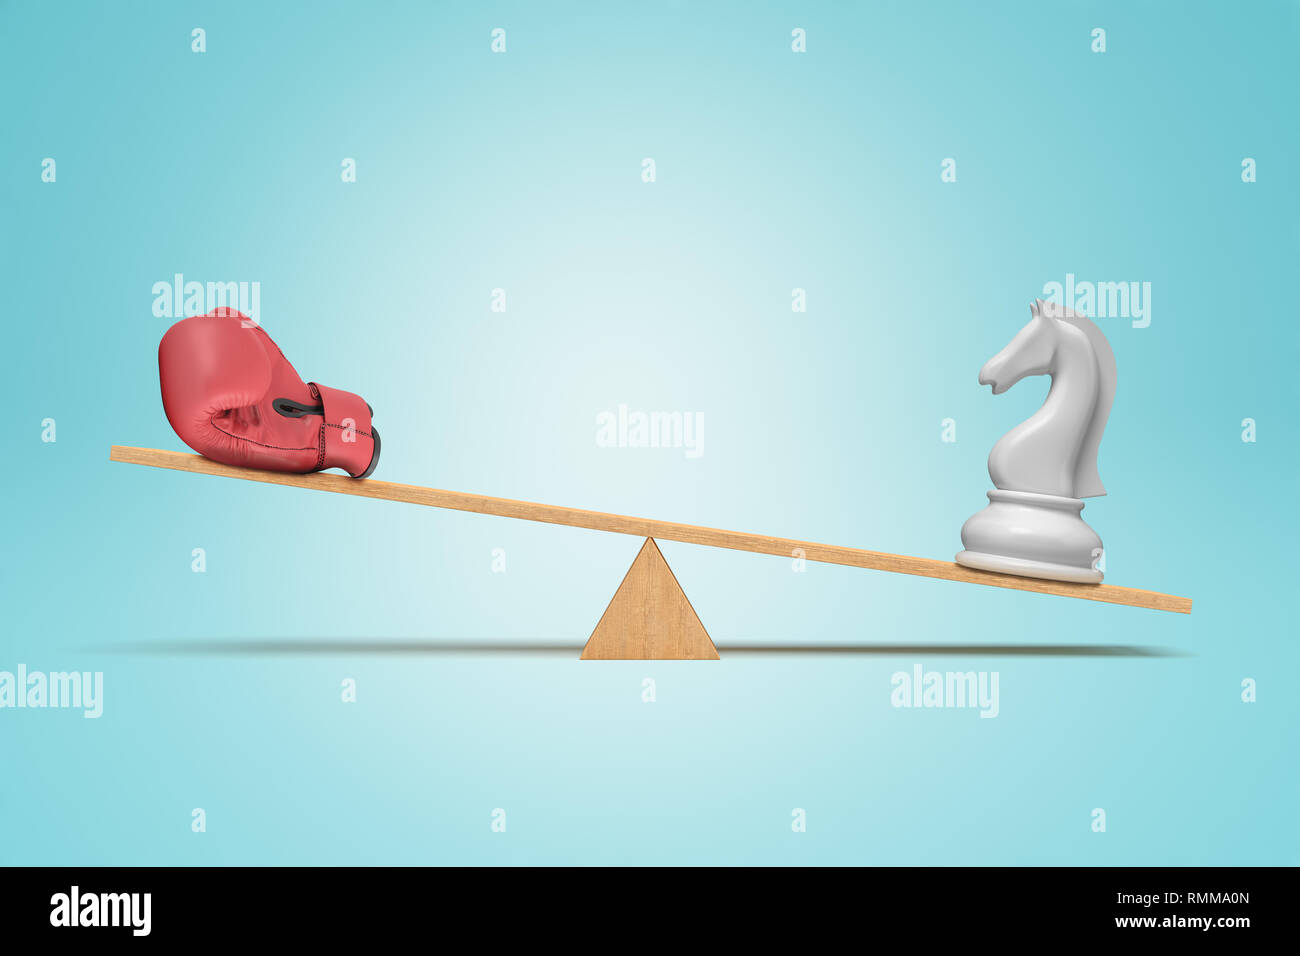 3d rendering of a seesaw with a chess knight outweighing a boxing glove. Stock Photo